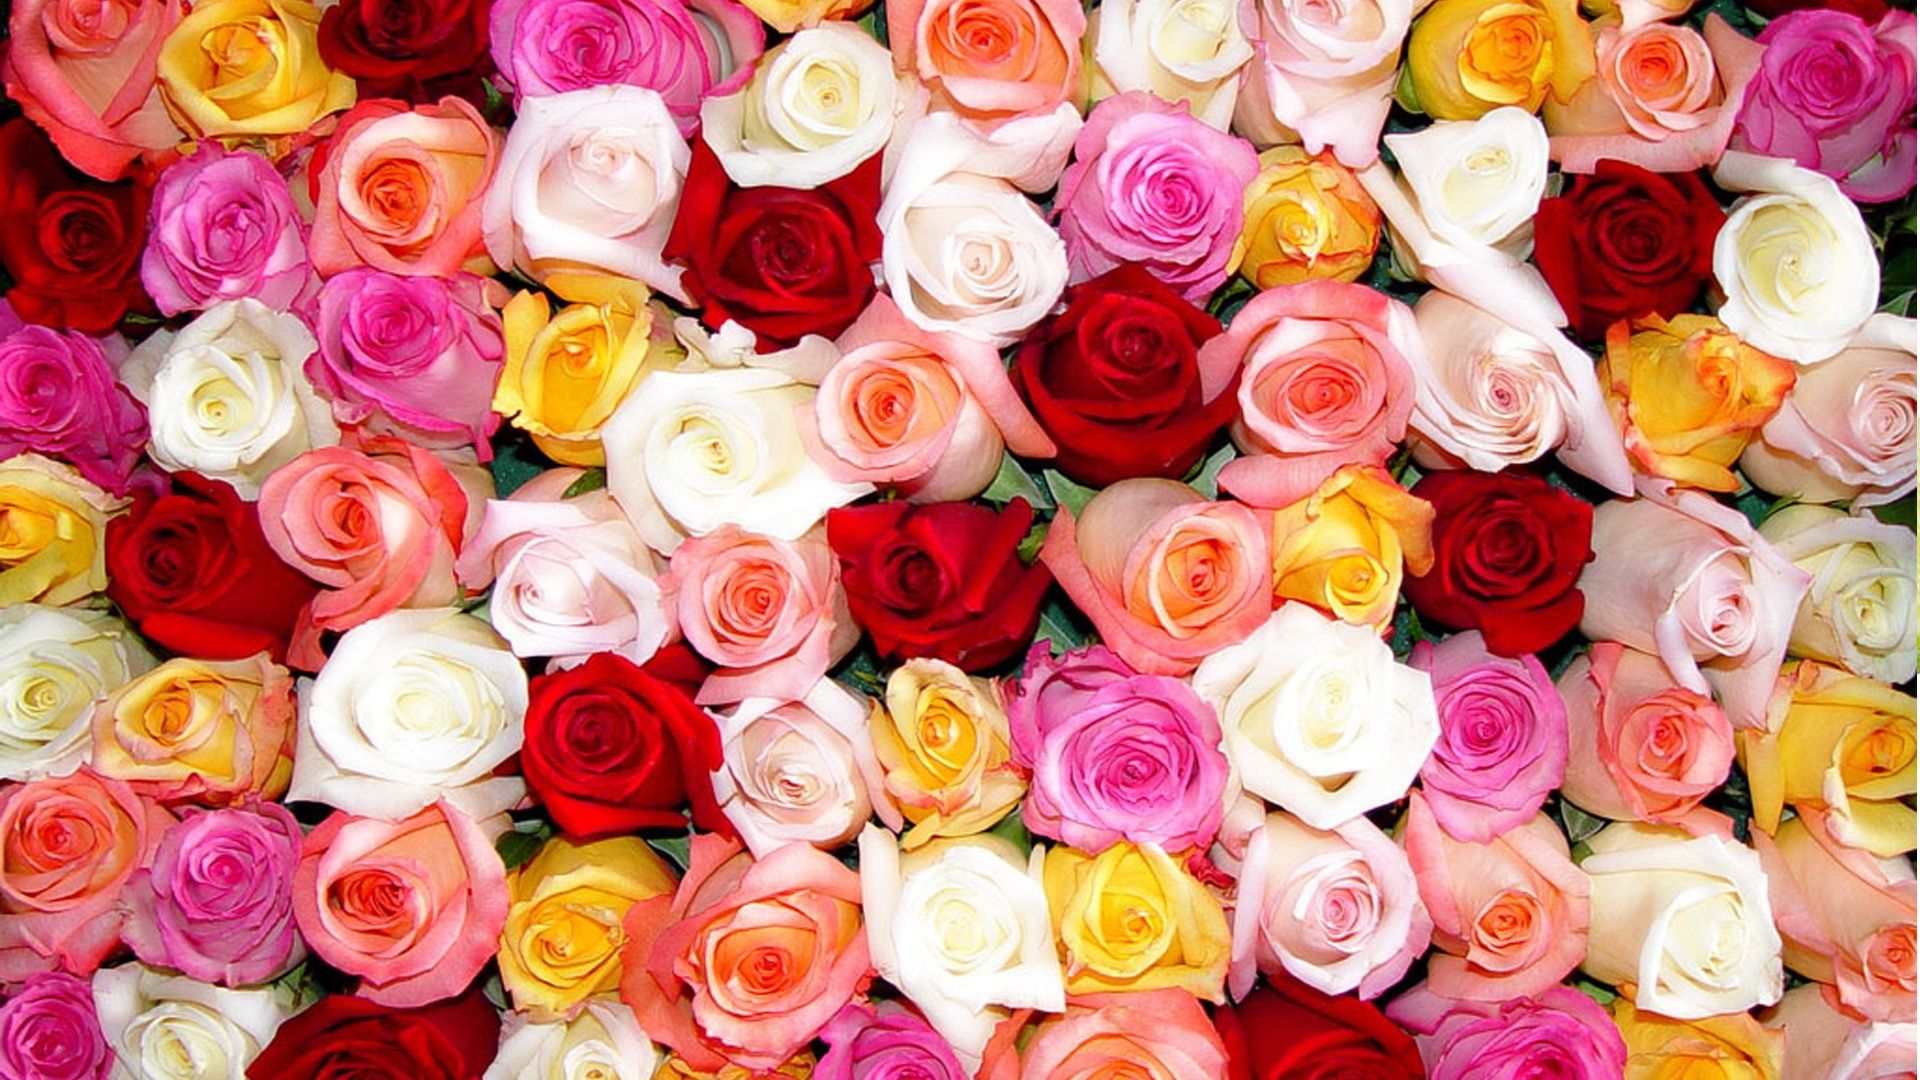 Colored Roses | Wallpapers Design